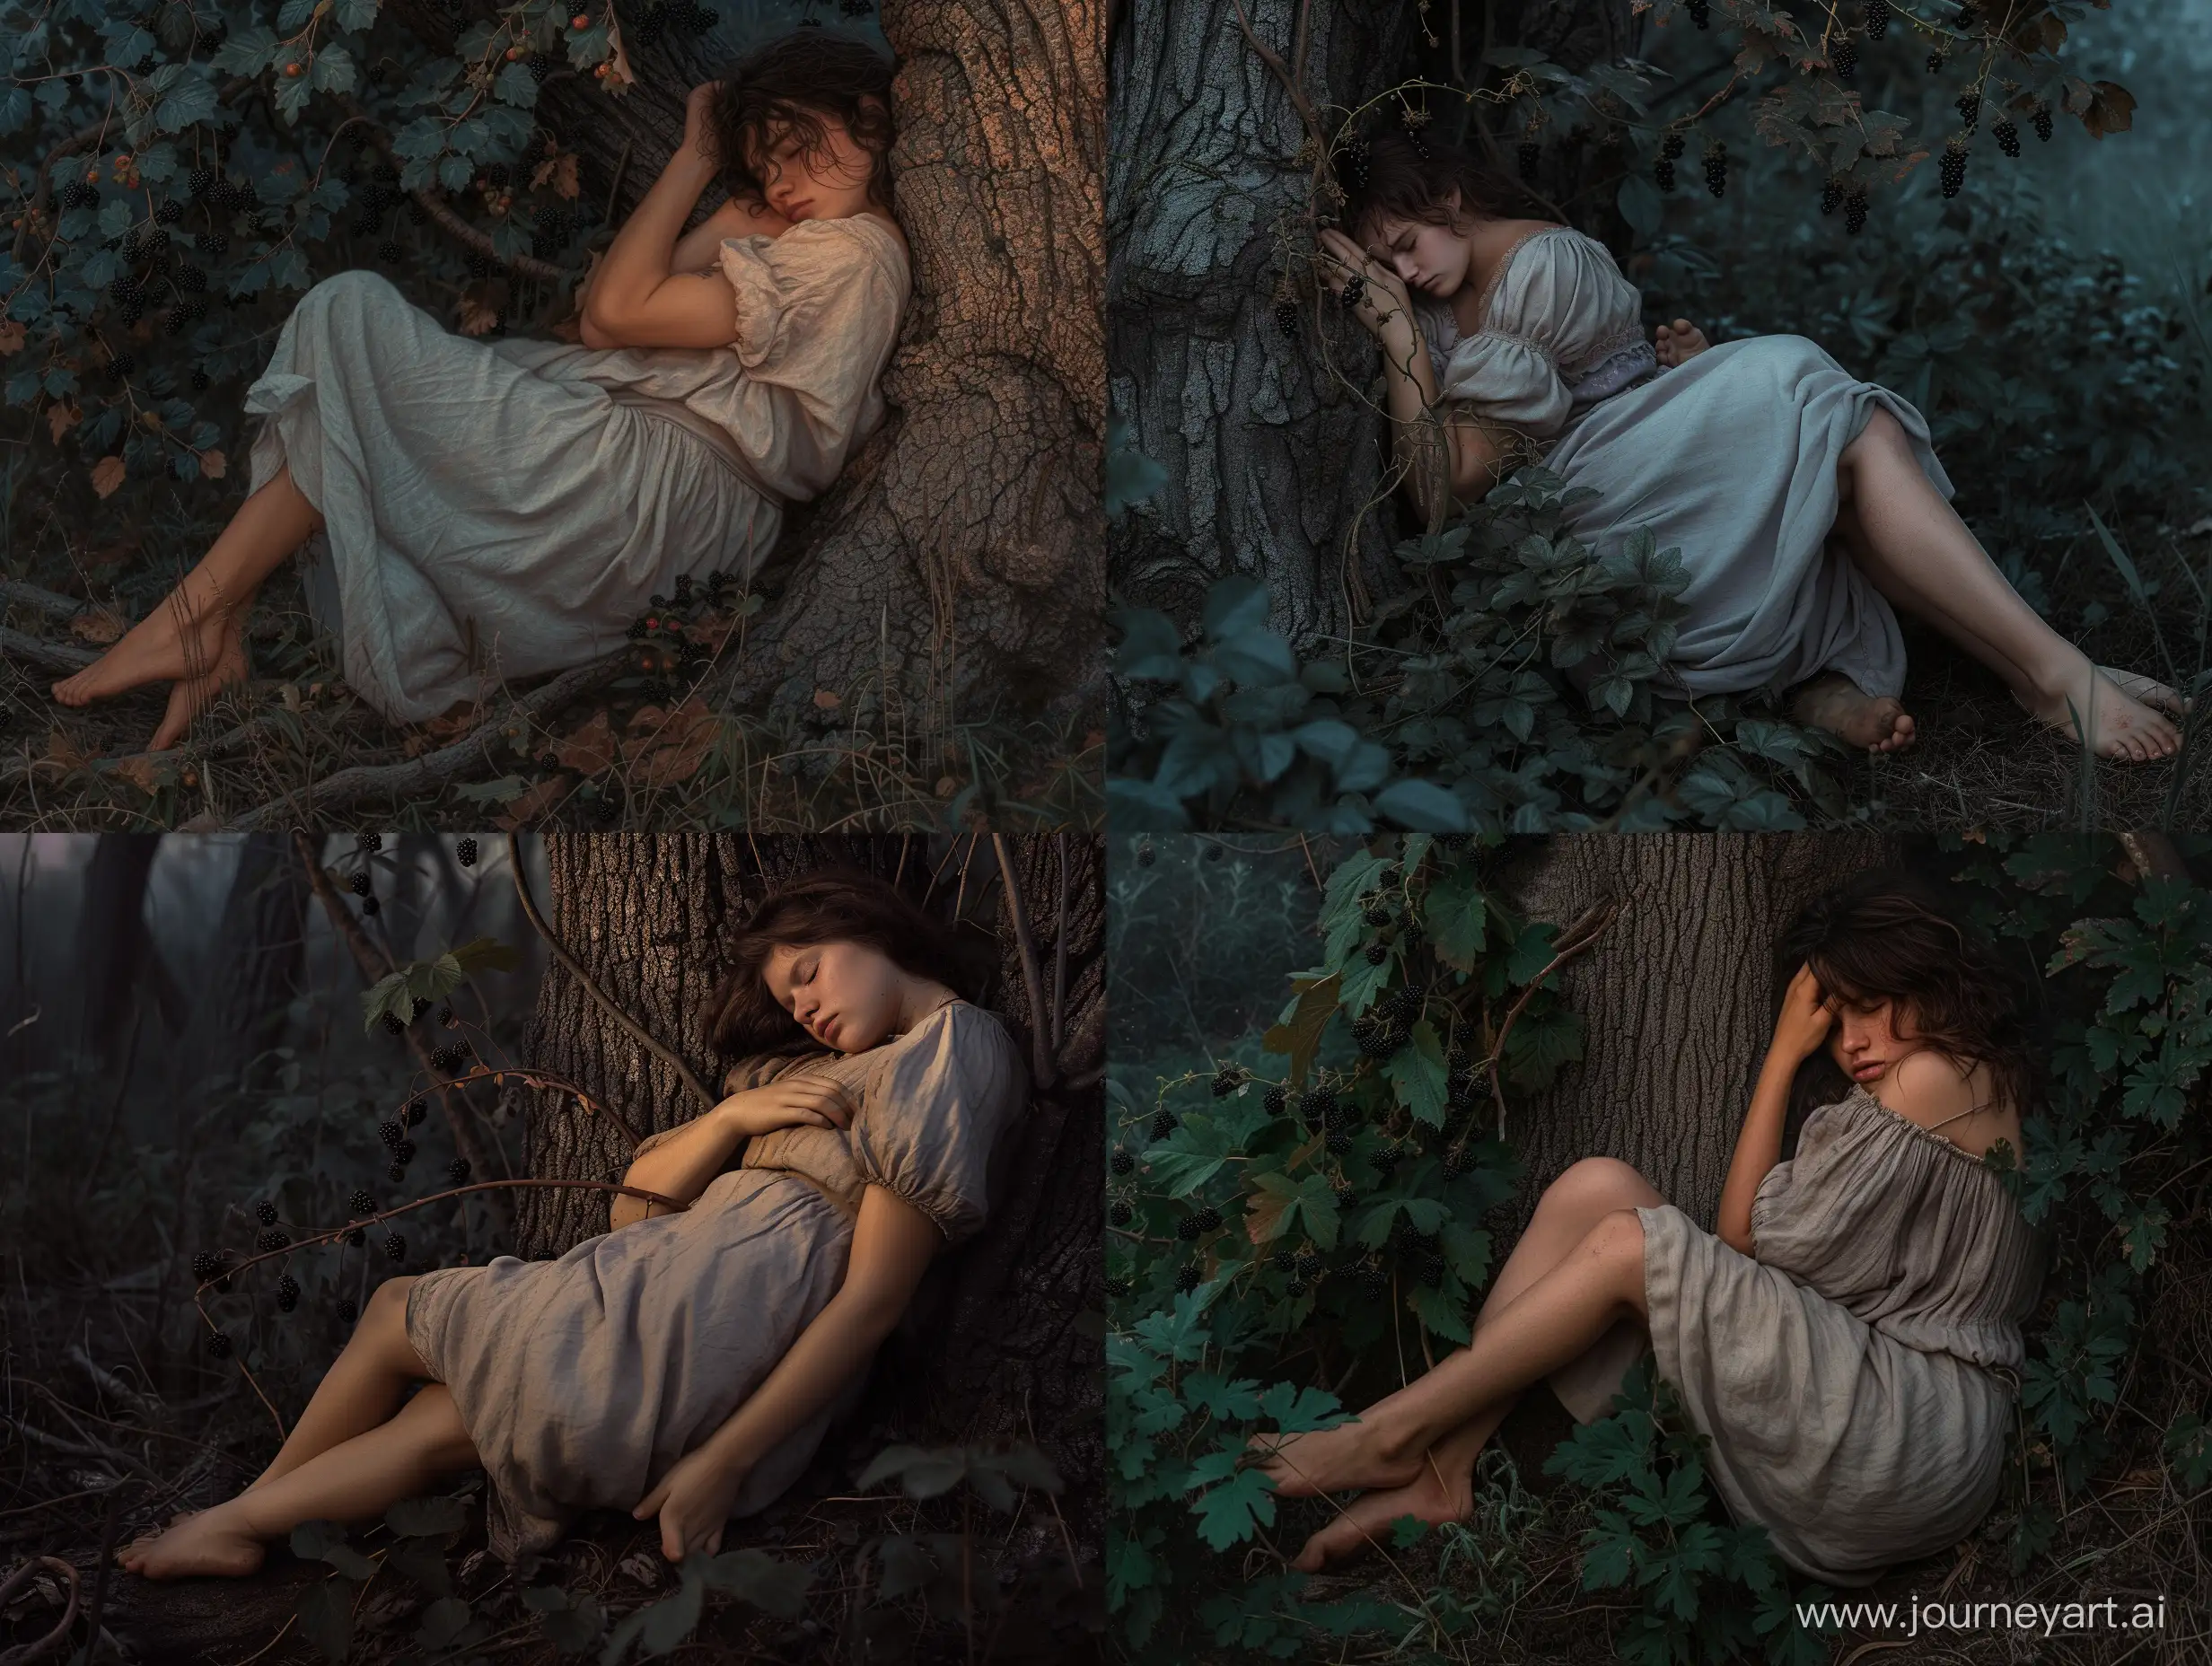 Tranquil-Twilight-Slumber-Woman-Resting-Against-Forest-Tree-Trunk